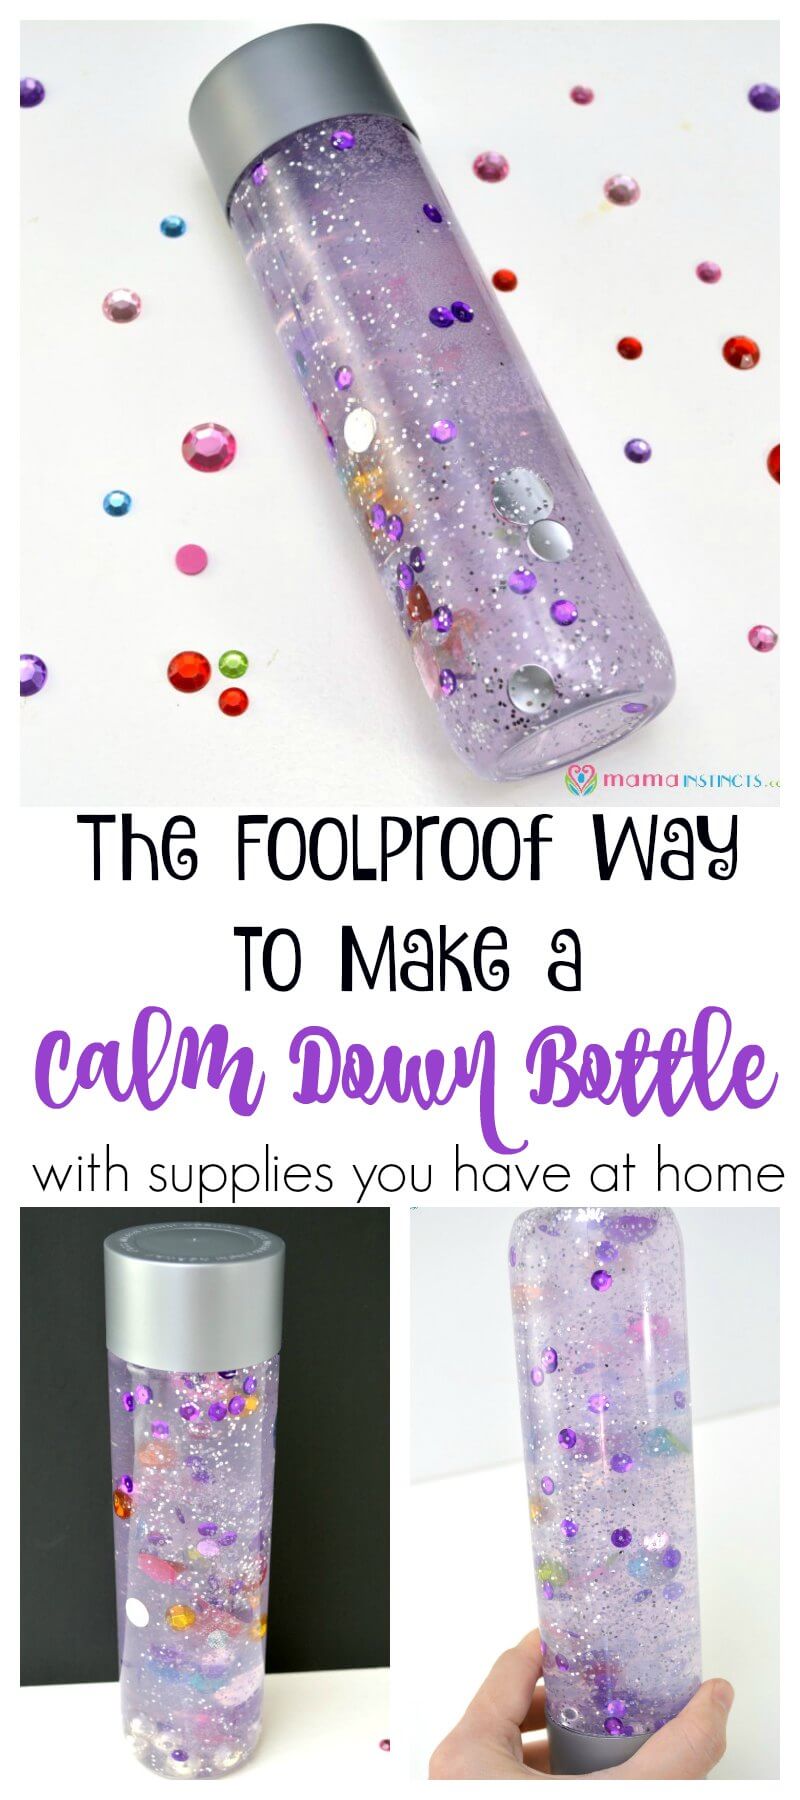 If you had issues getting your sensory bottles to work, try this easy peasy tutorial that will work like a charm. These calm down bottles can be customized with whatever you have at home and provide hours of fun! #sensoryactivity